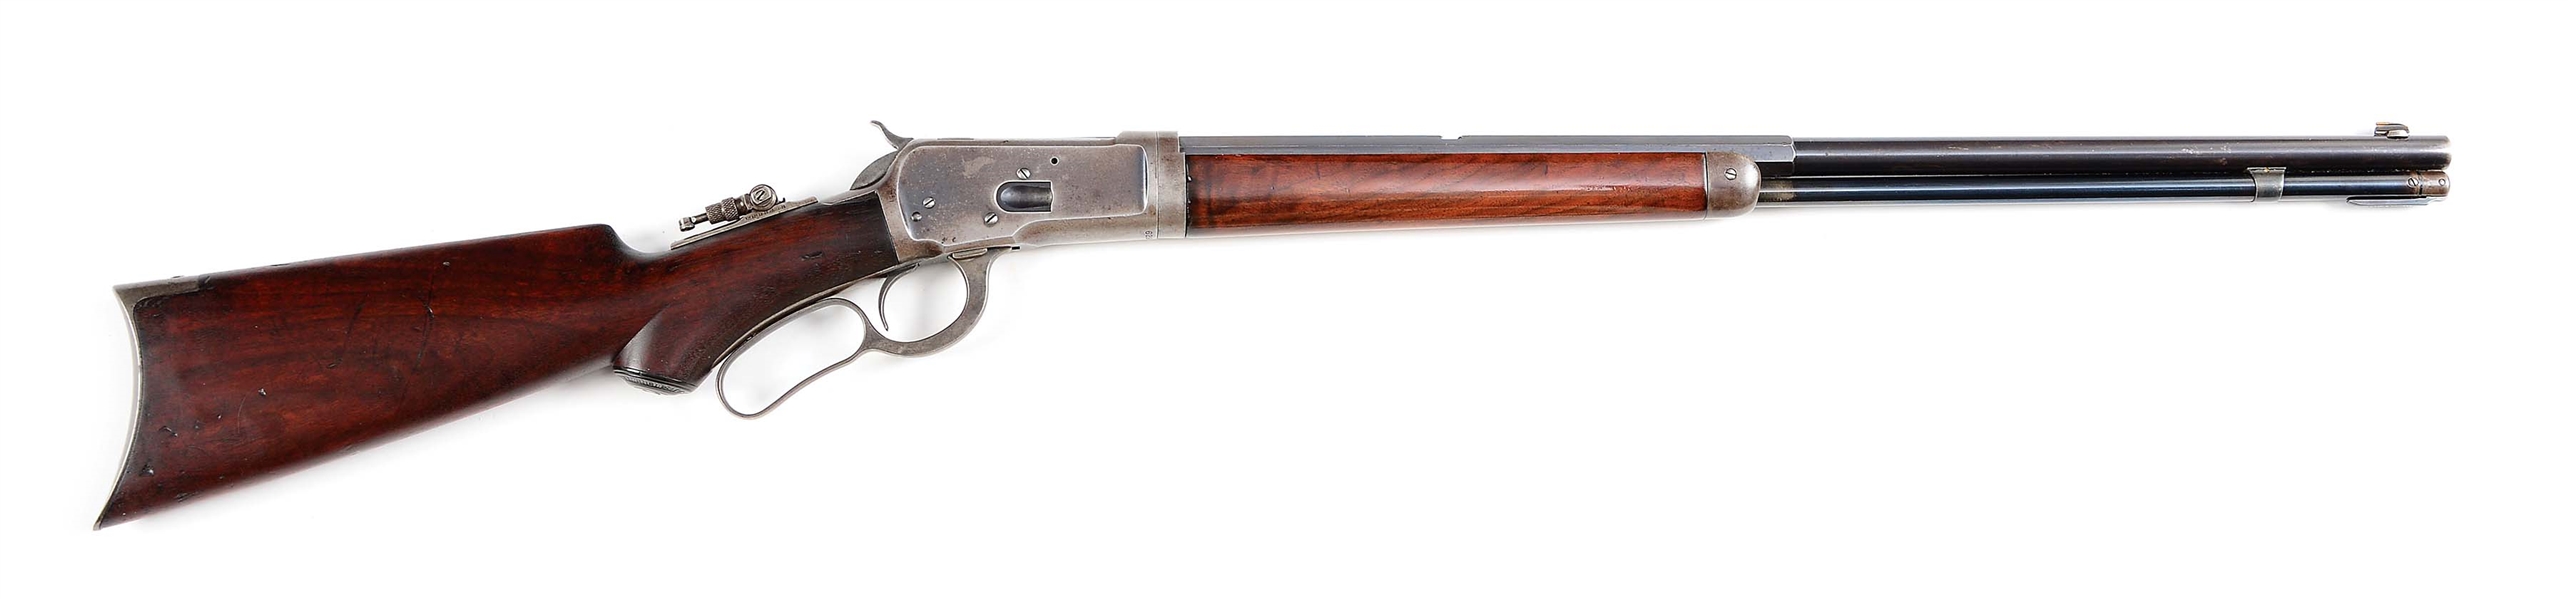 (C) WINCHESTER MODEL 1892 TAKEDOWN LEVER ACTION RIFLE (1911).